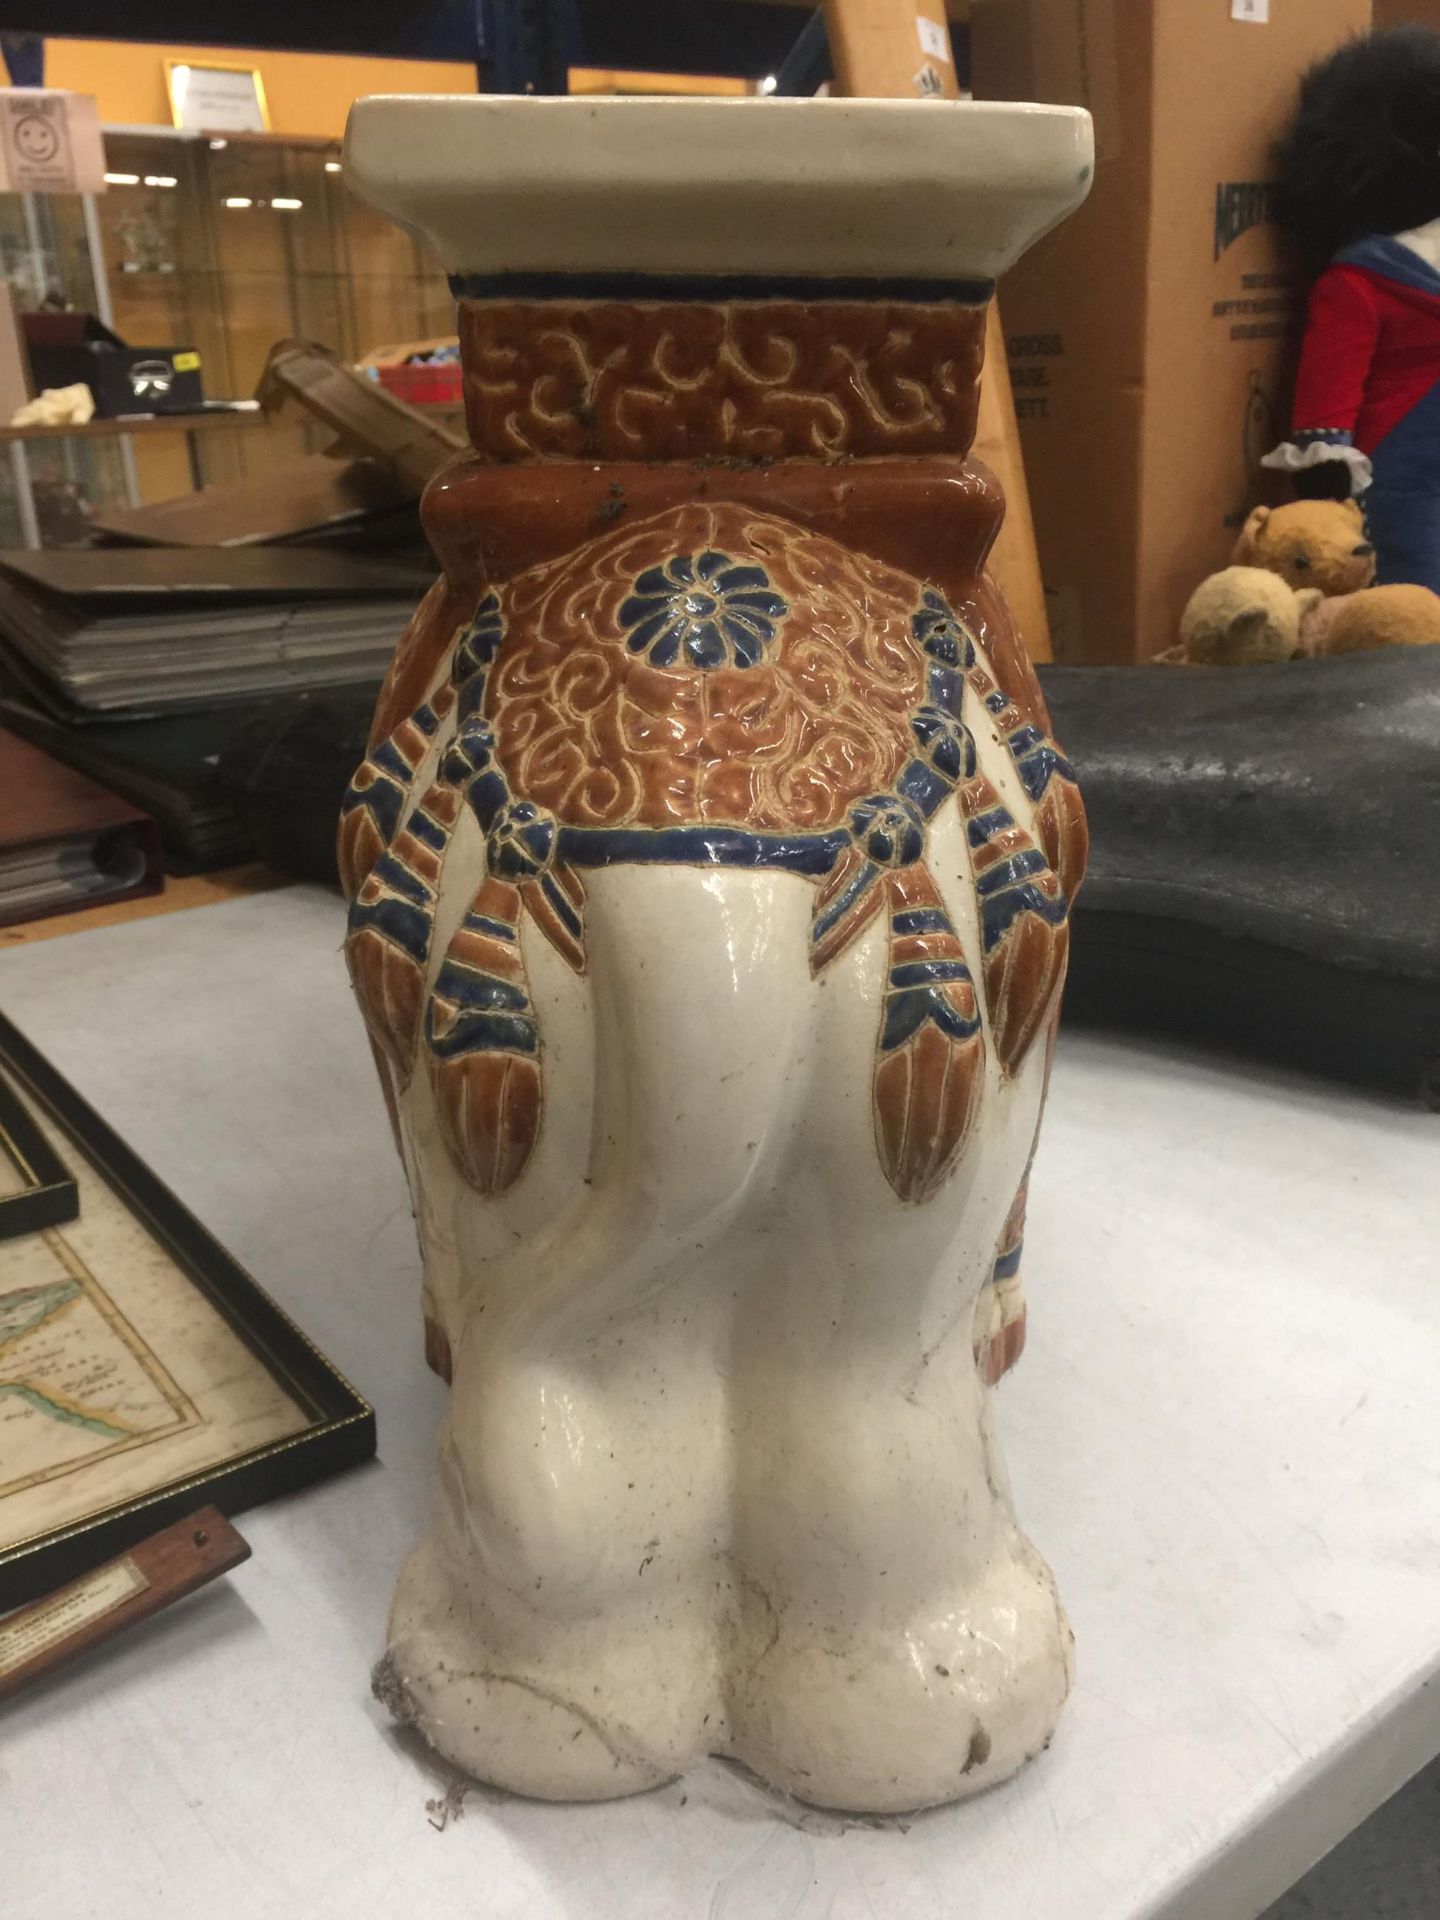 A LARGE CERAMIC ELEPHANT PLANT STAND/SEAT - Image 3 of 4